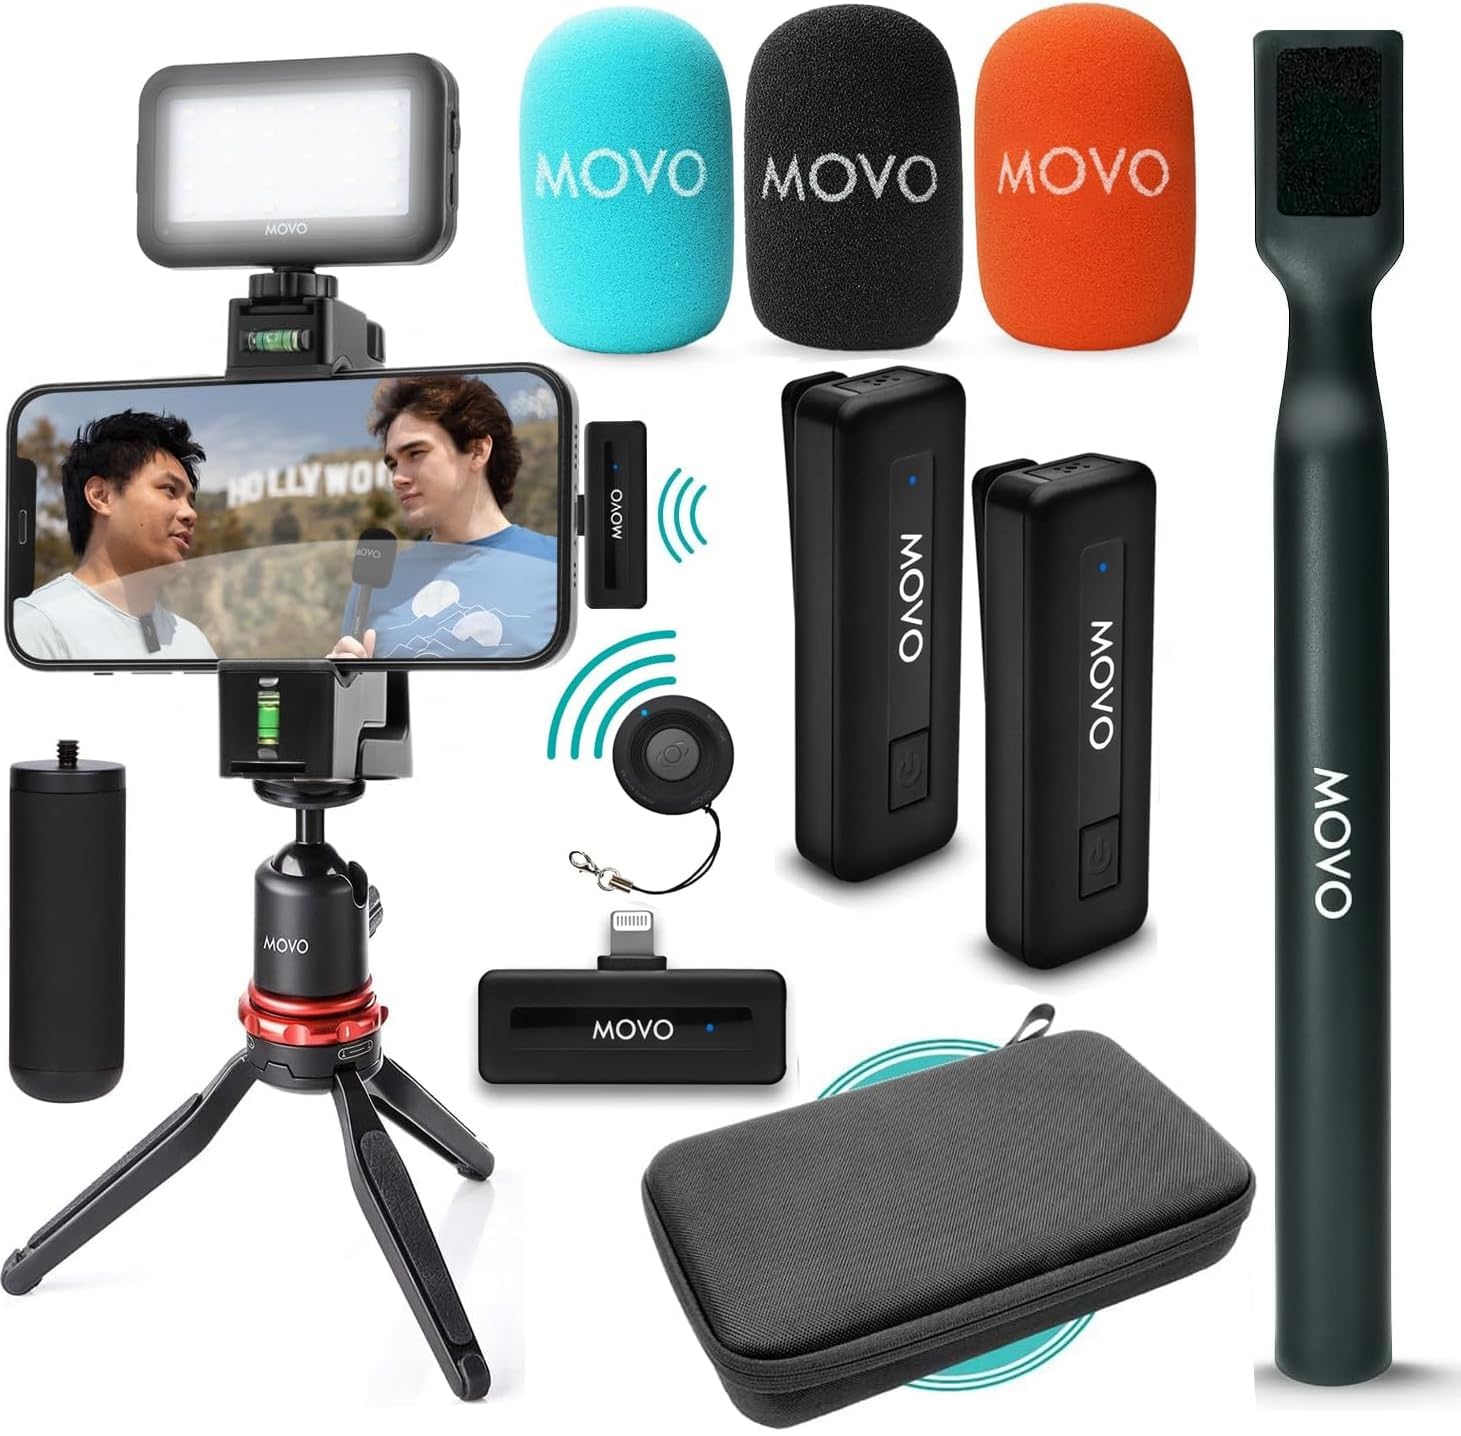 Movo iVlogger Wireless Vlogging Kit for iPhone with Dual Wireless Lavalier Microphone, Tripod, Phone Mount, LED Light, Bluetooth Remote, and WHX-HM Mic Handle - Wireless Youtube Starter Kit for iPhone  - Very Good